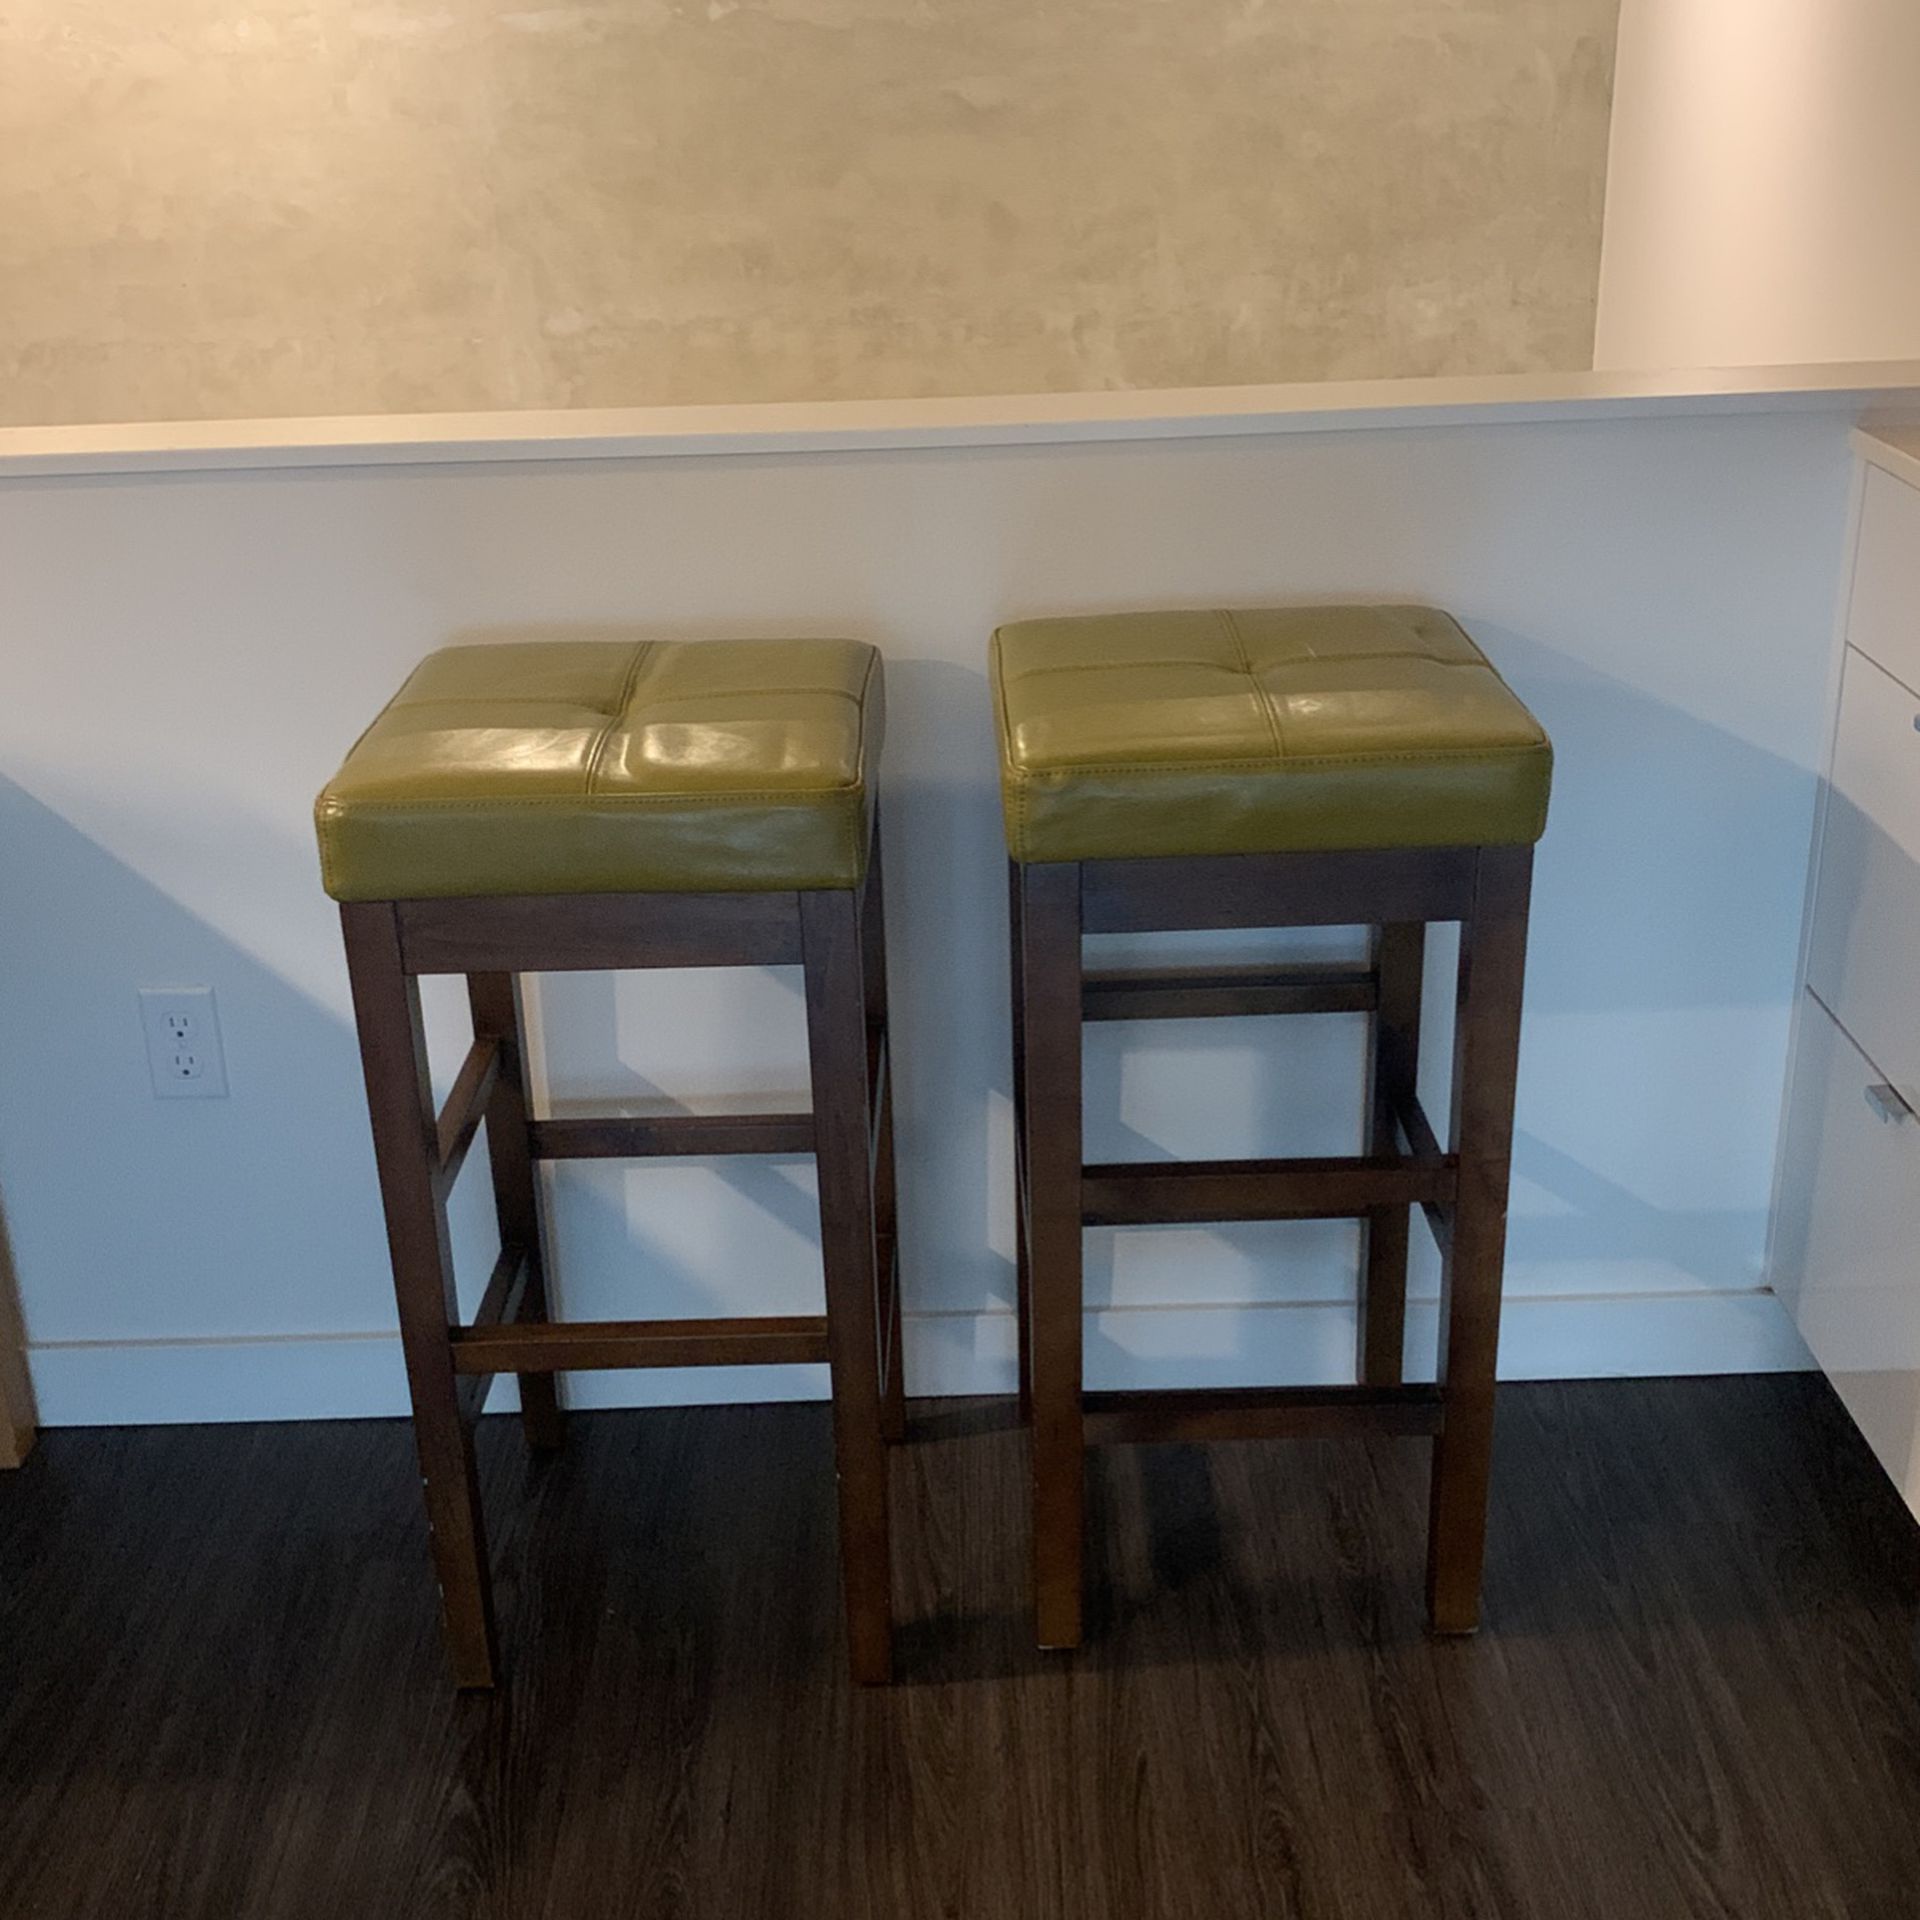 Two Green & Wood Barstools